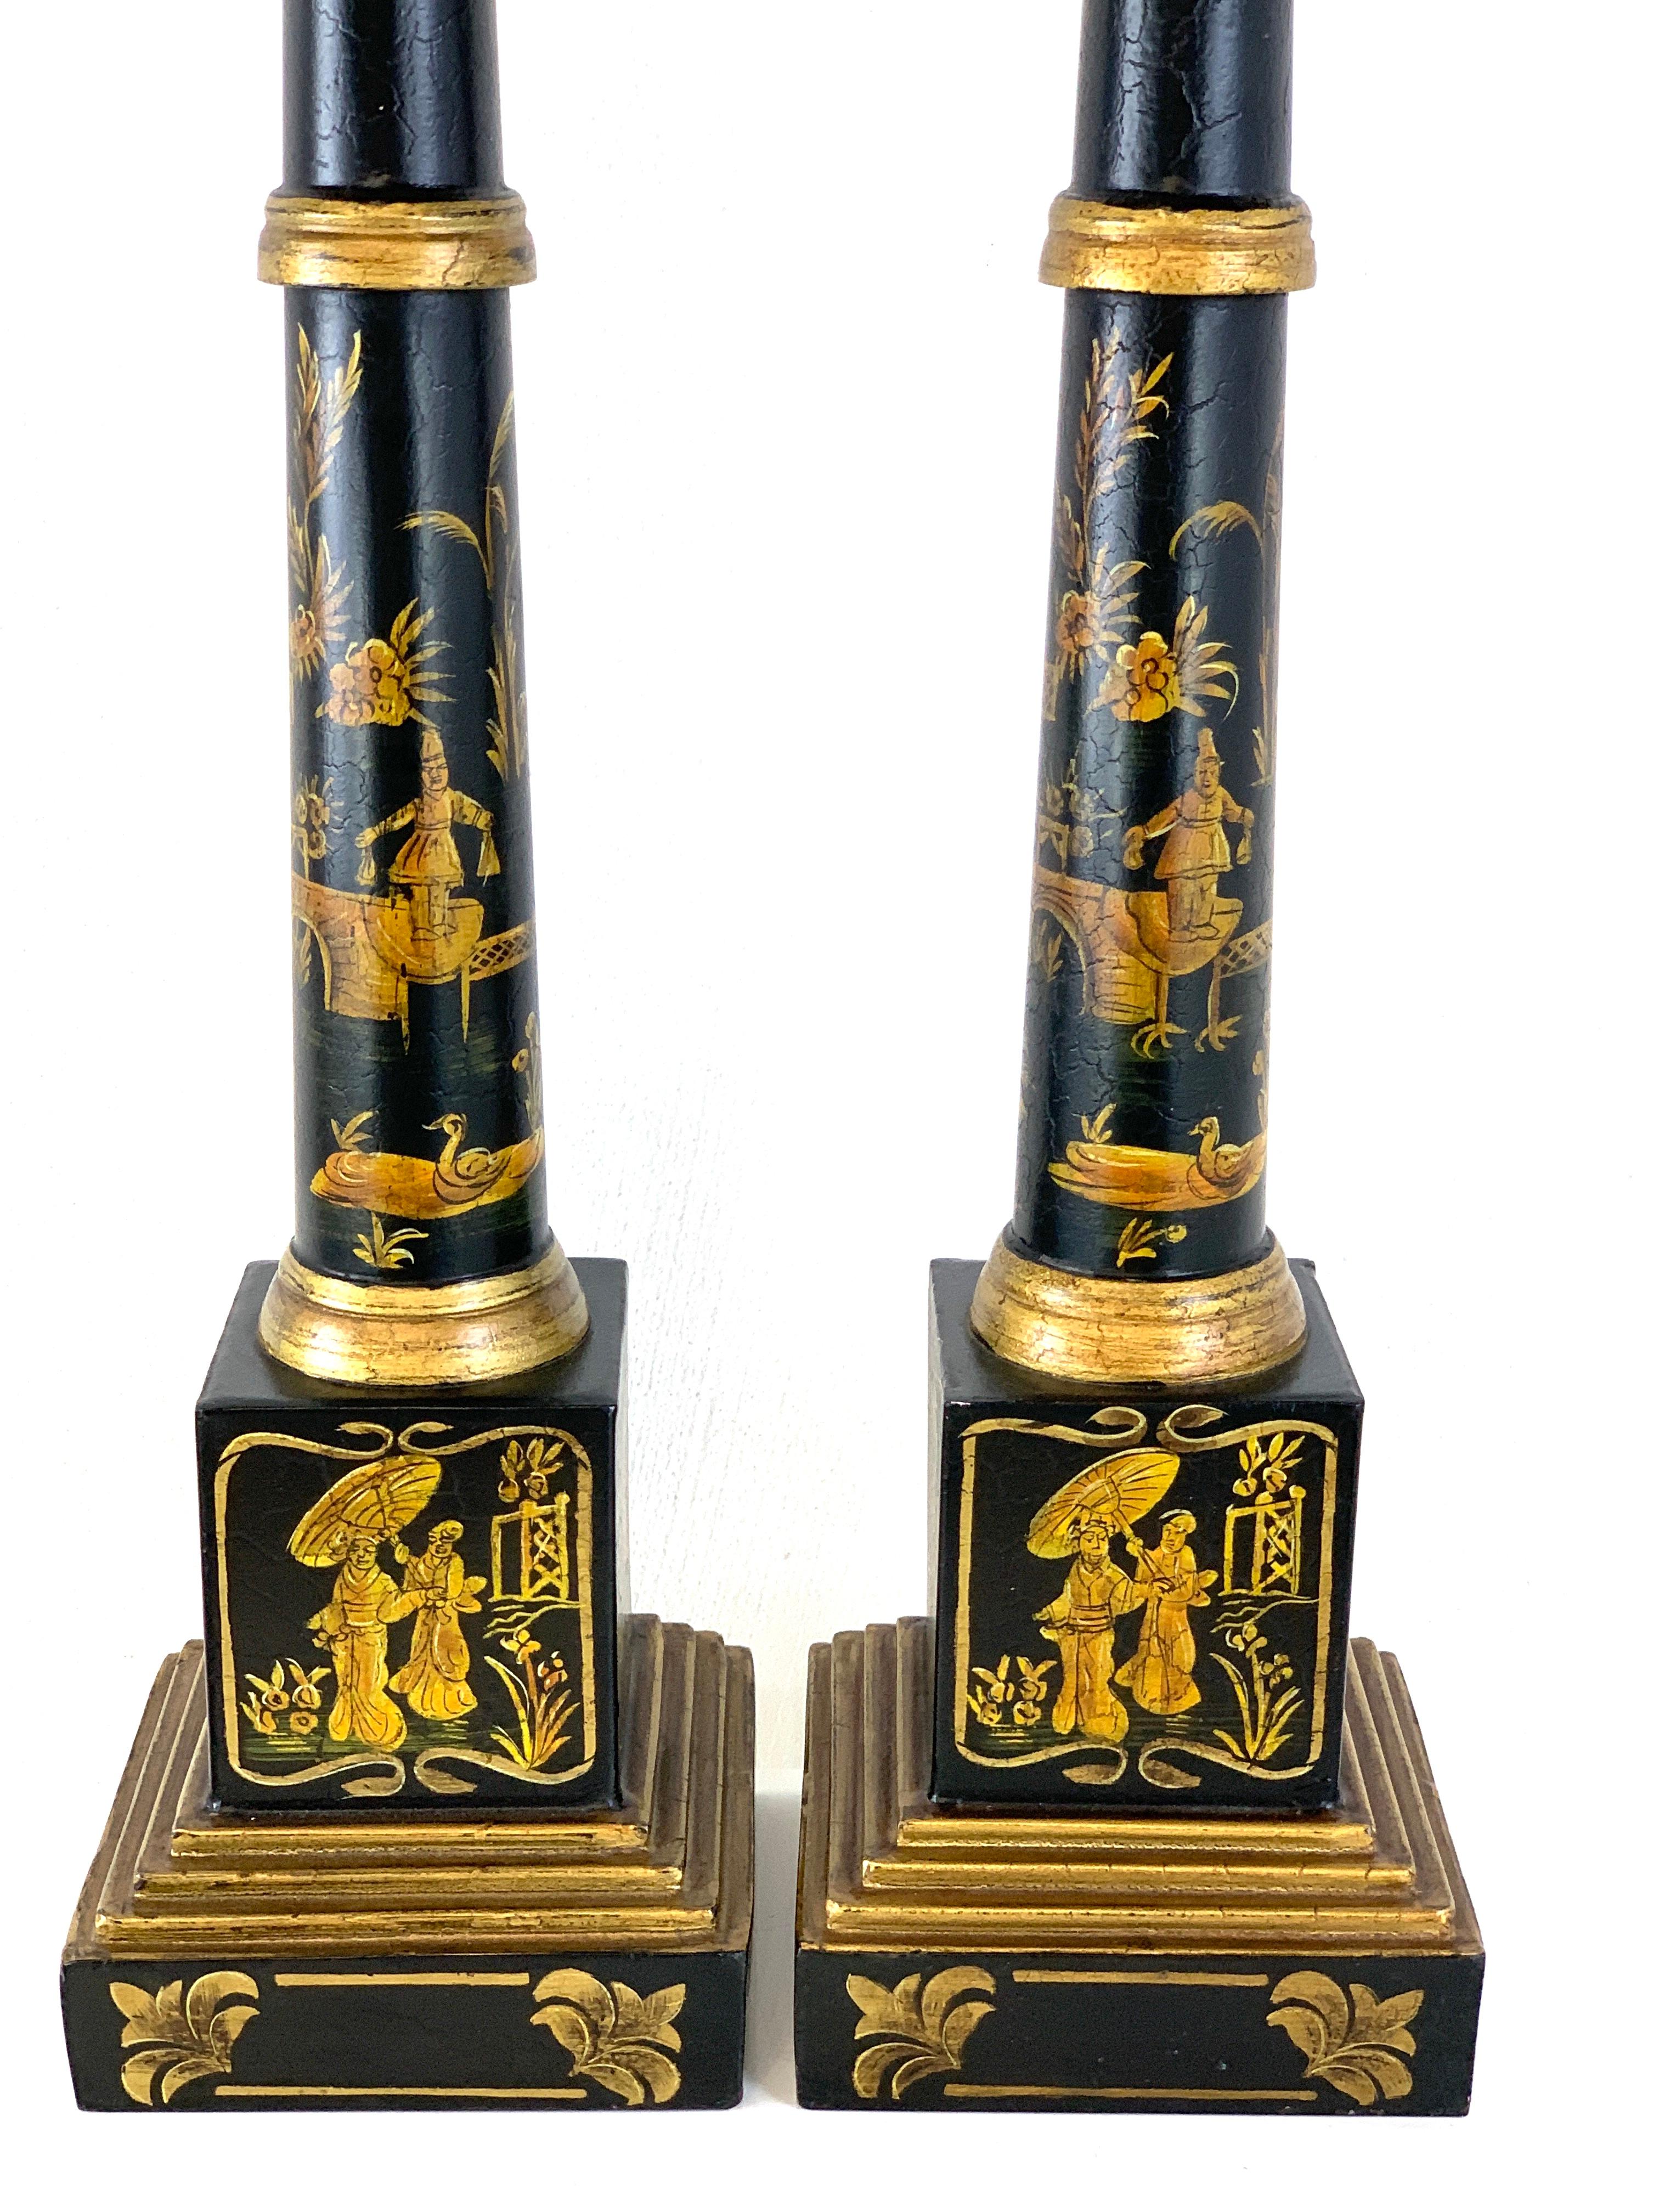 Pair of English black tole gilt chinoiserie column lamps, beautifully decorated on all sides. New wiring
Measures: 6